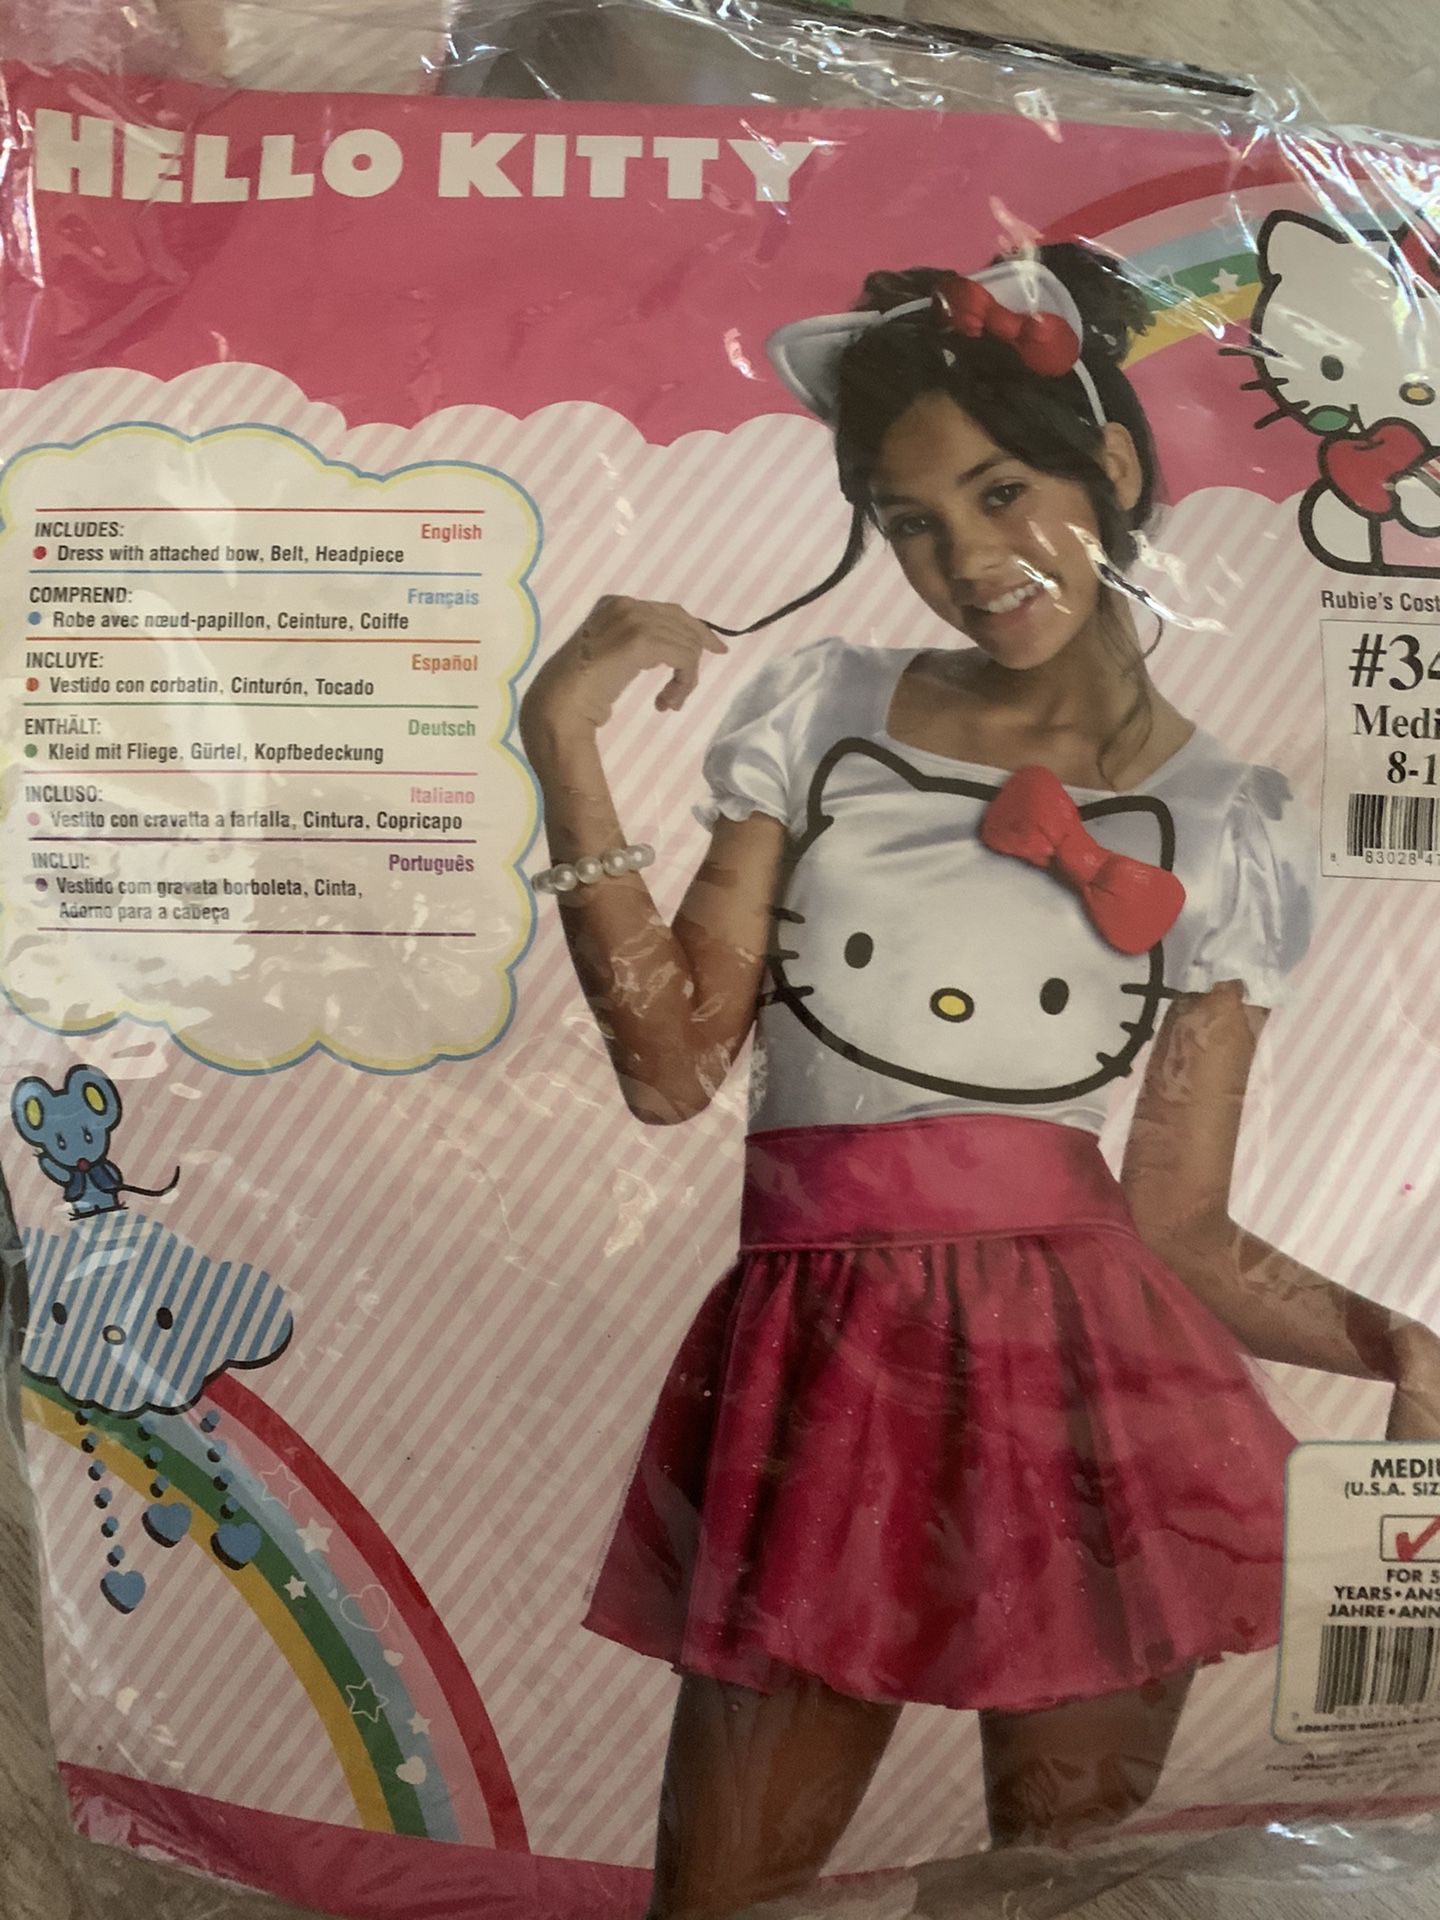 Hello Kitty Costume 5-7 yrs old